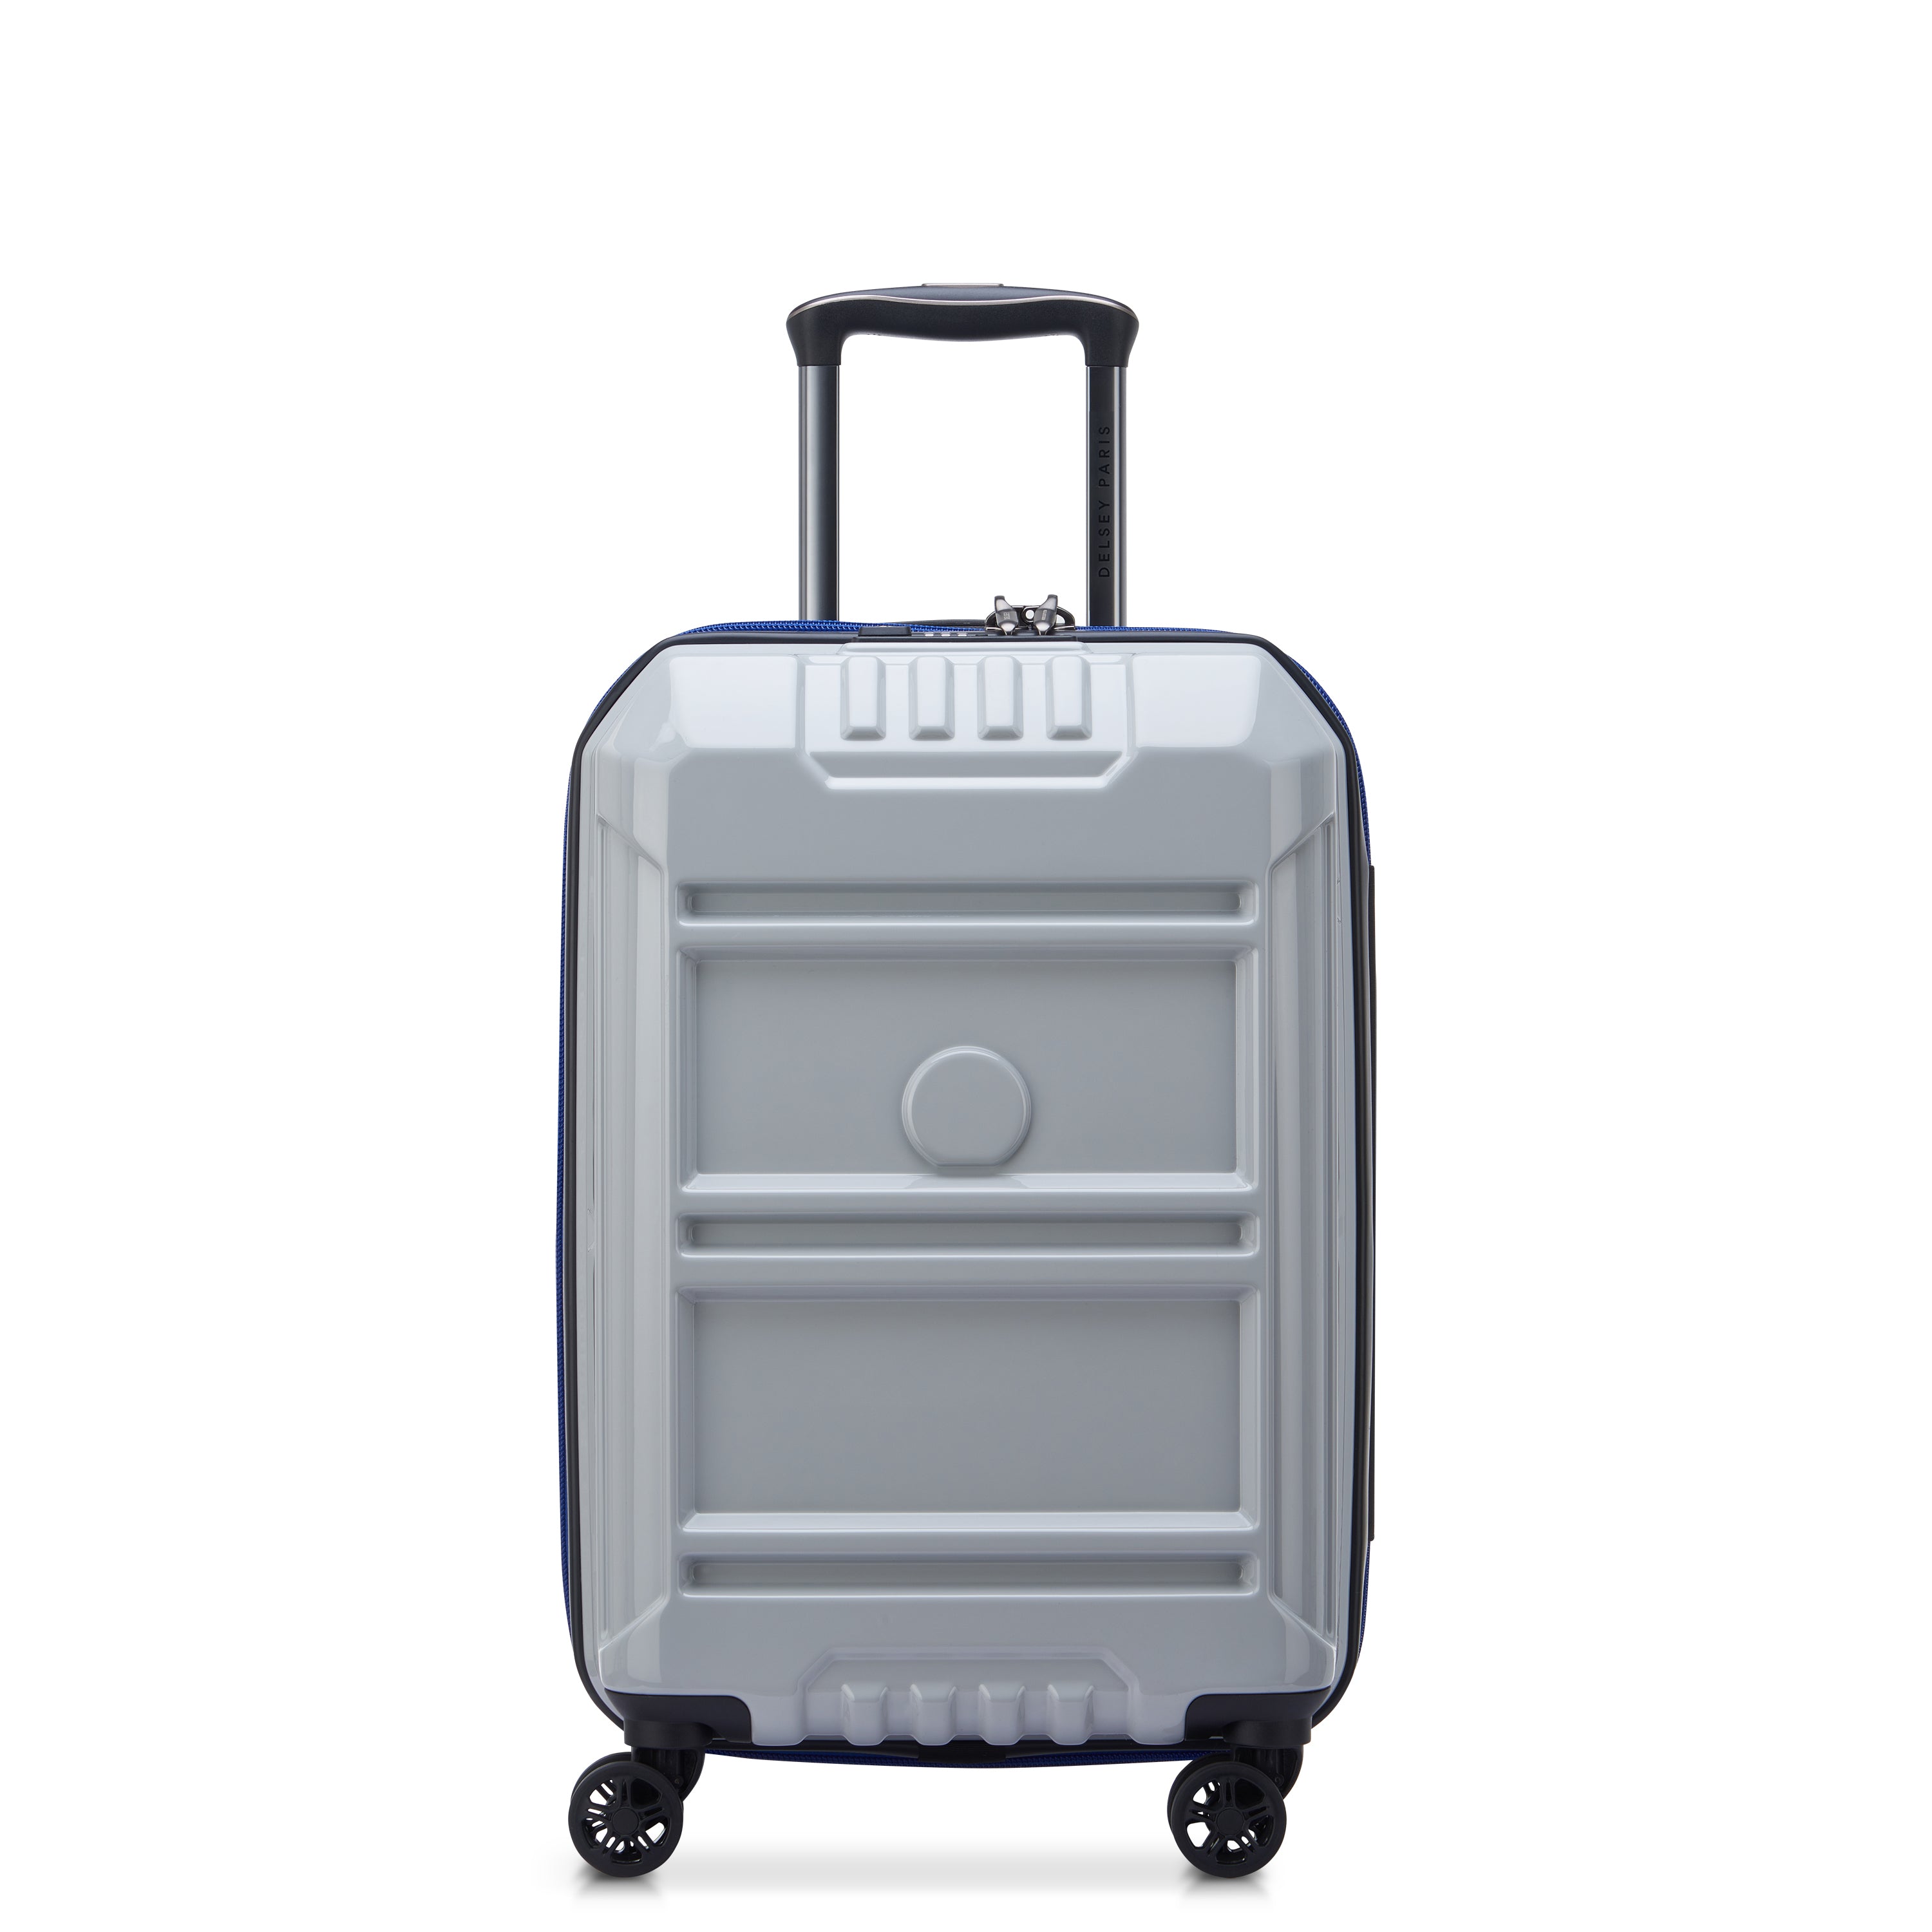 Delsey Rempart 55cm Hardcase Expandable 4 Double Wheel Flex Cabin Luggage Trolley Case Storm Grey Glossy - 218180121